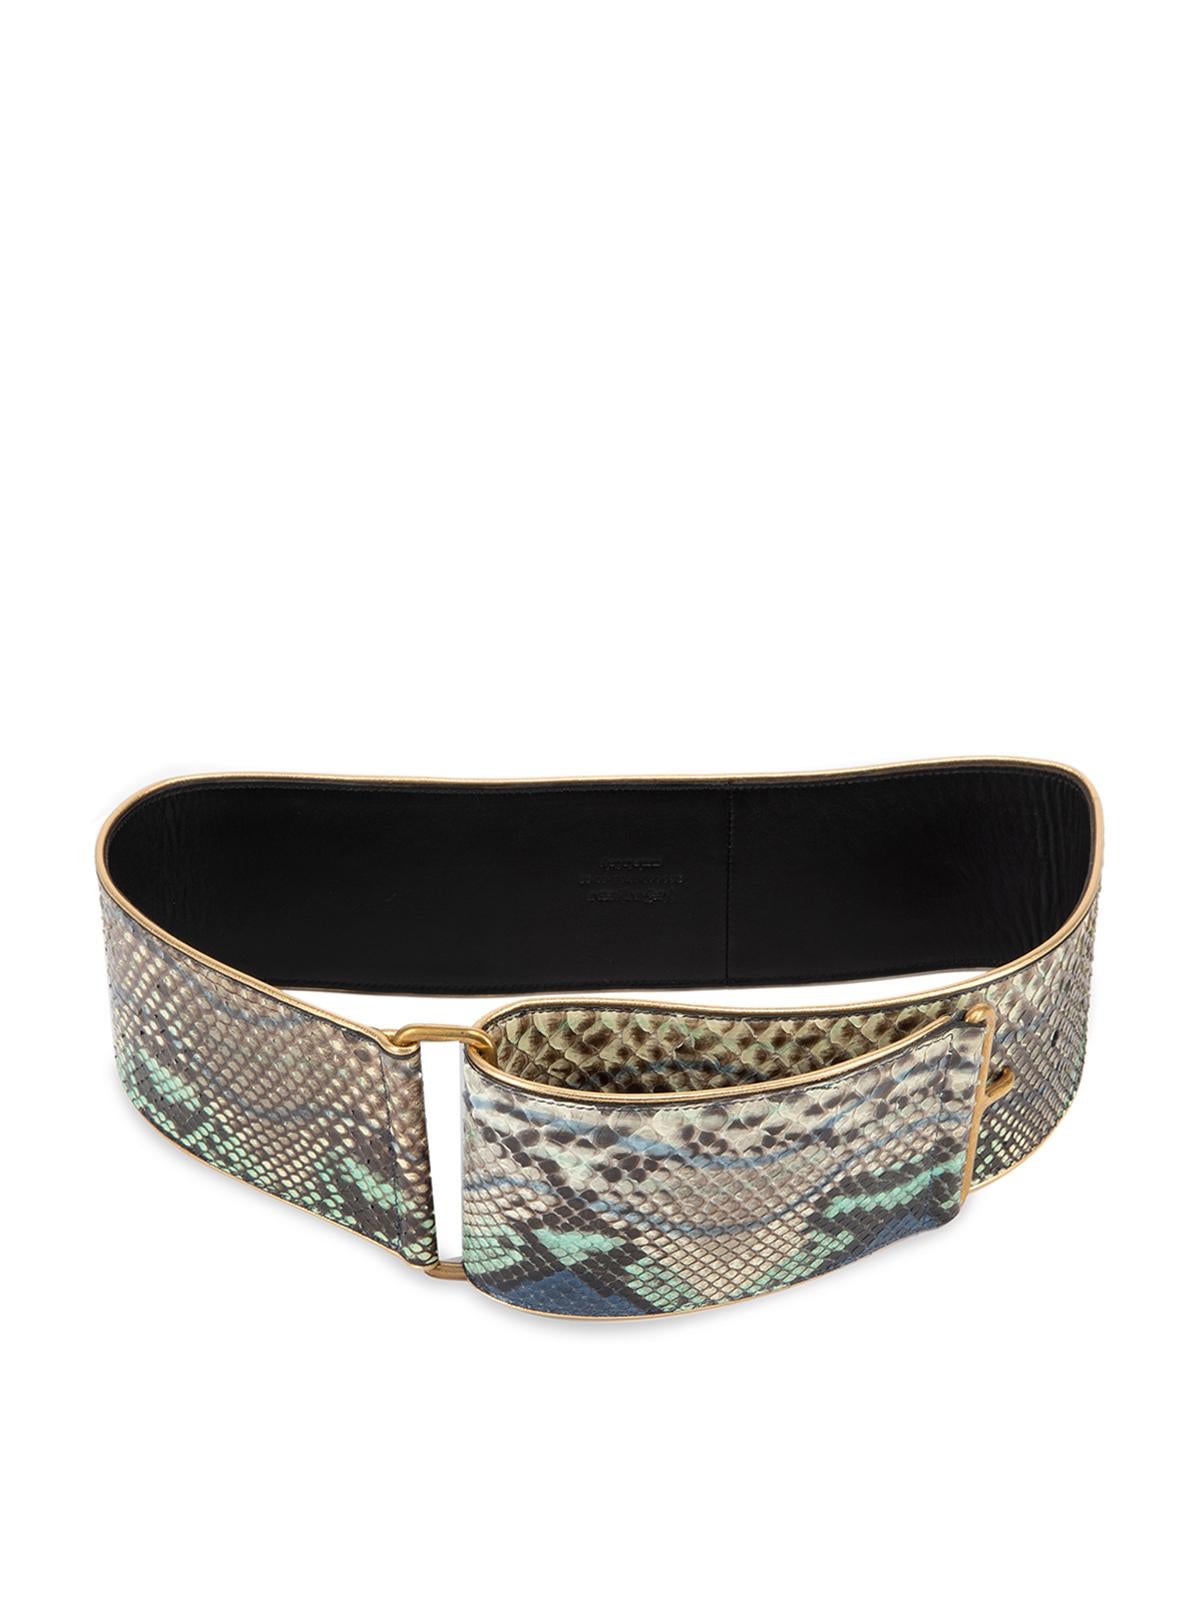 CONDITION is Very good. Hardly any visible wear to belt is evident on this Yves Saint Laurent resale item. Details Multicolour- Grey, cream and blue Exotic leather Wide belt Snakeskin Gold tone hardware Made in Italy Composition EXTERIOR: Exotic